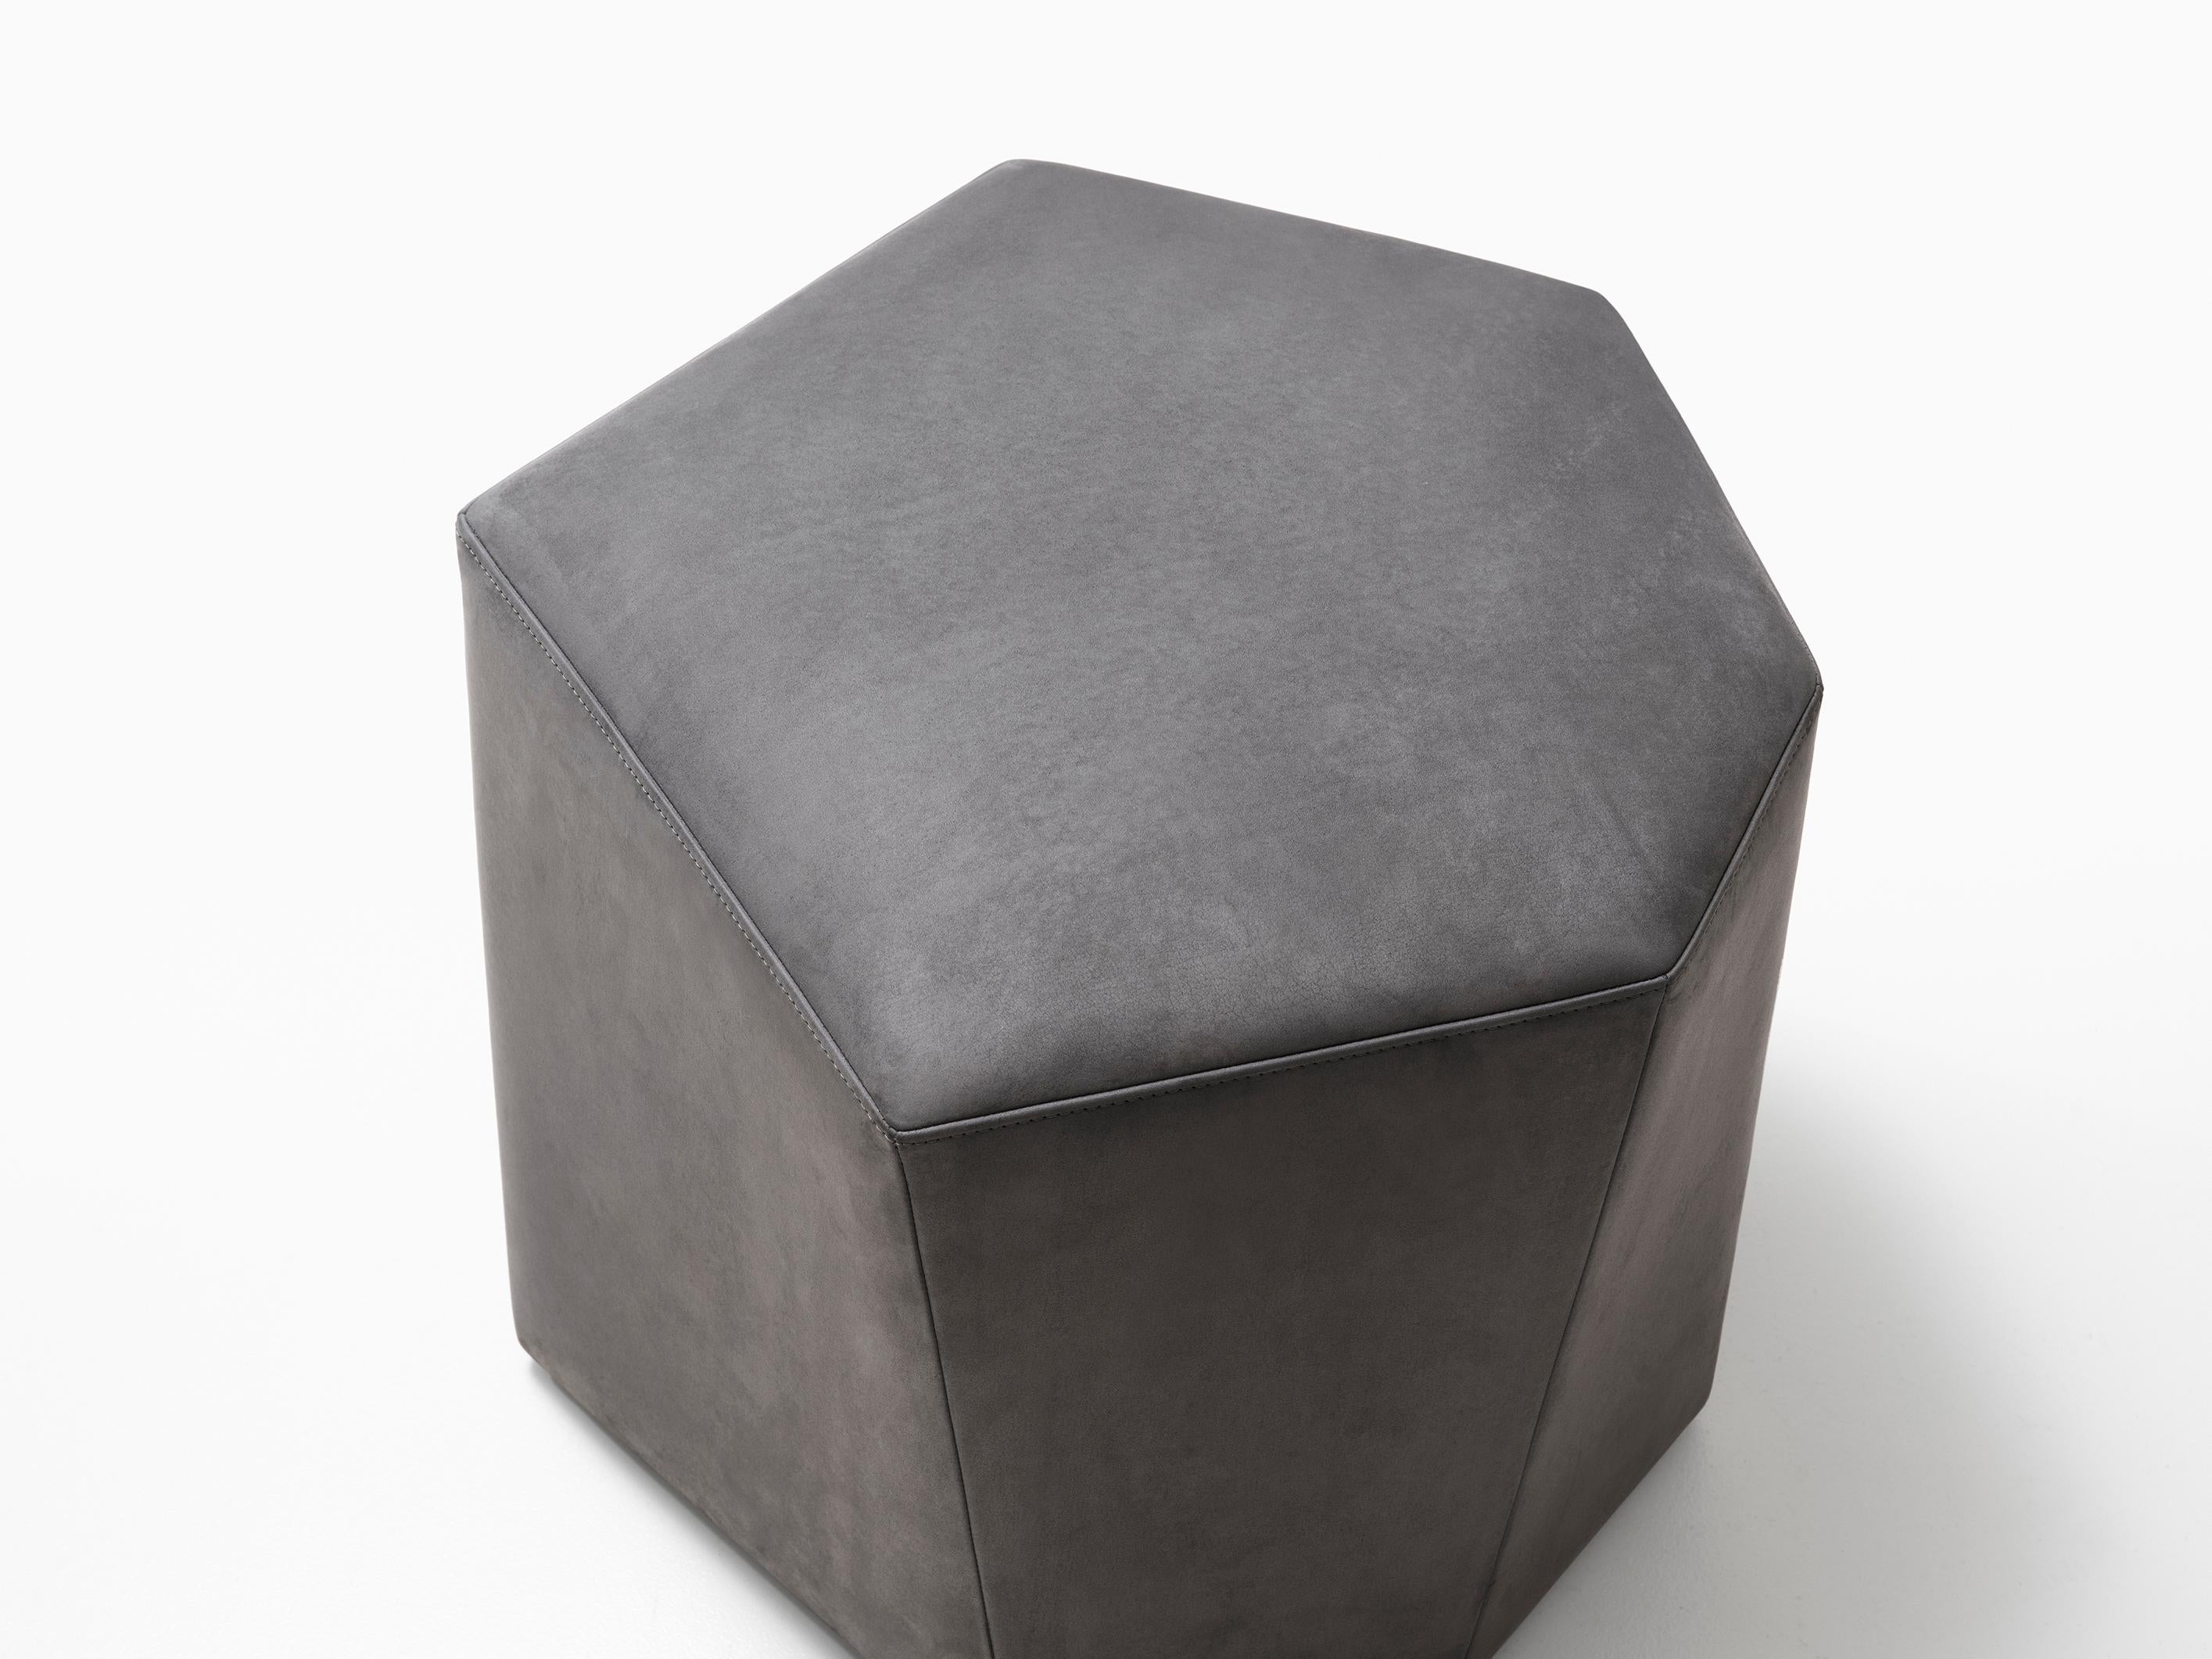 HOLLY HUNT Vrille ottoman in elephant leather. A wonderful geometric ottoman highlighting precise stitching details that will add interest, or additional seating, to any living space.


Additional Information:
Leather: 6002/22 Made in the Suede: